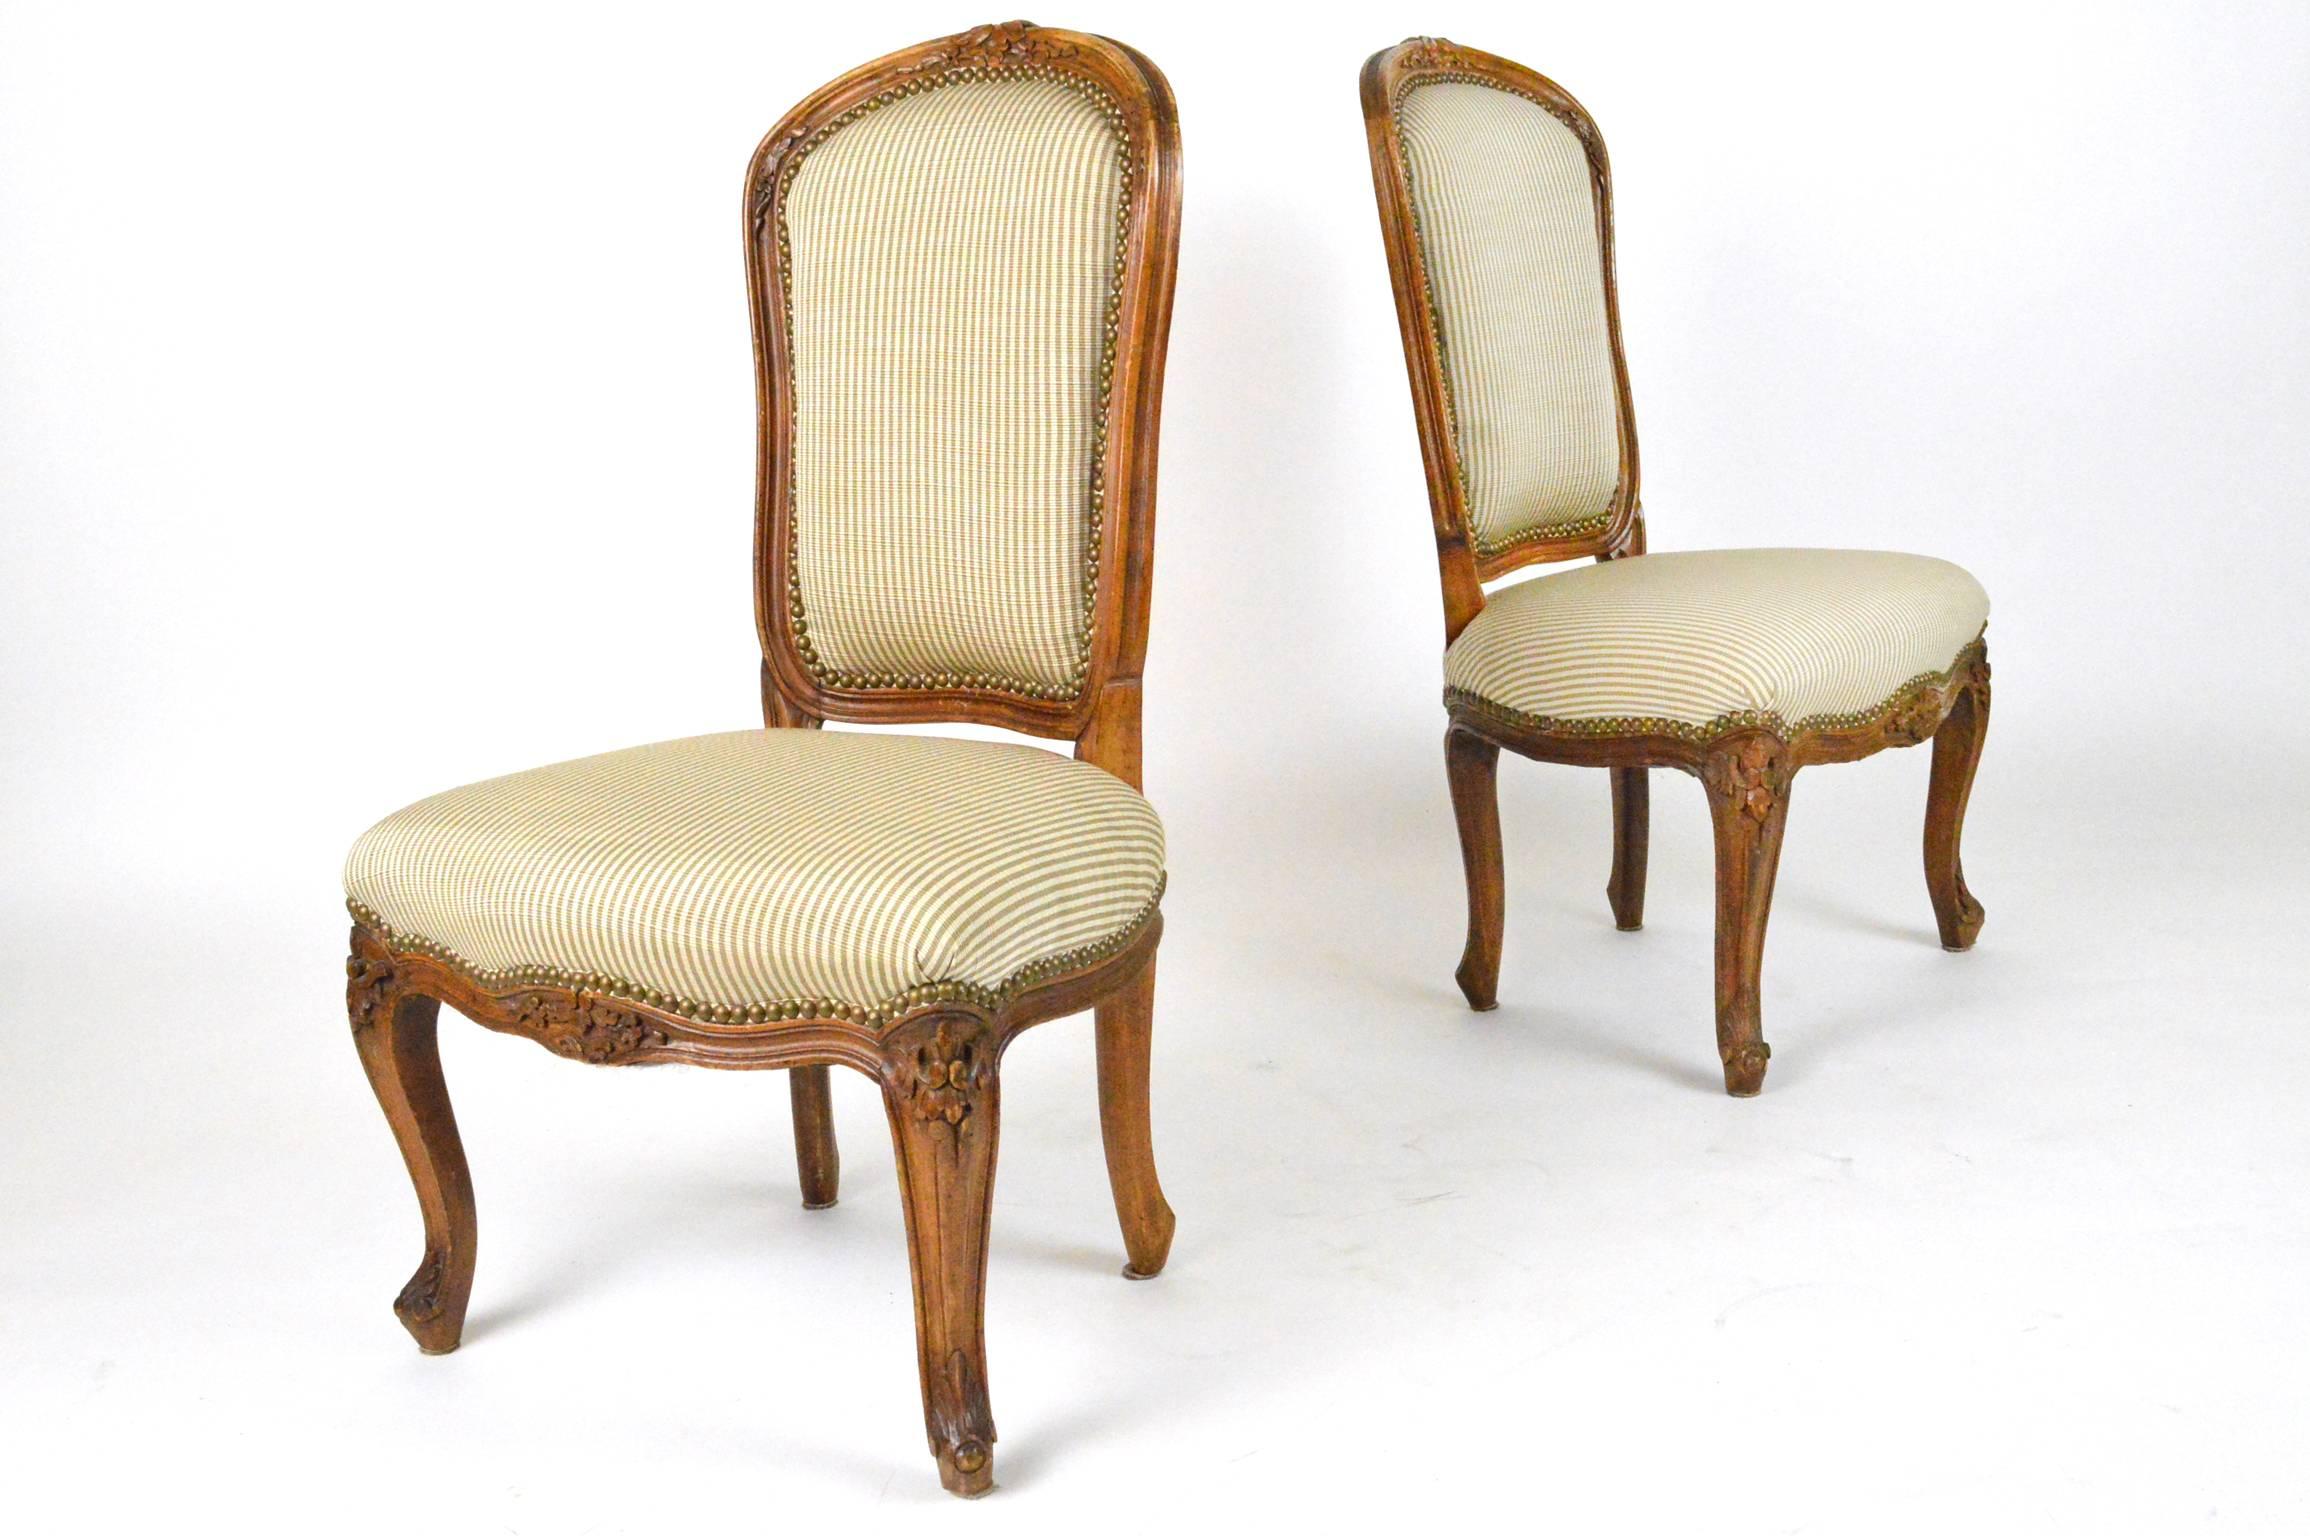 Pair of Louis XV style fruitwood slipper chairs covered in a neutral beige stripe upholstery with nailhead trim.